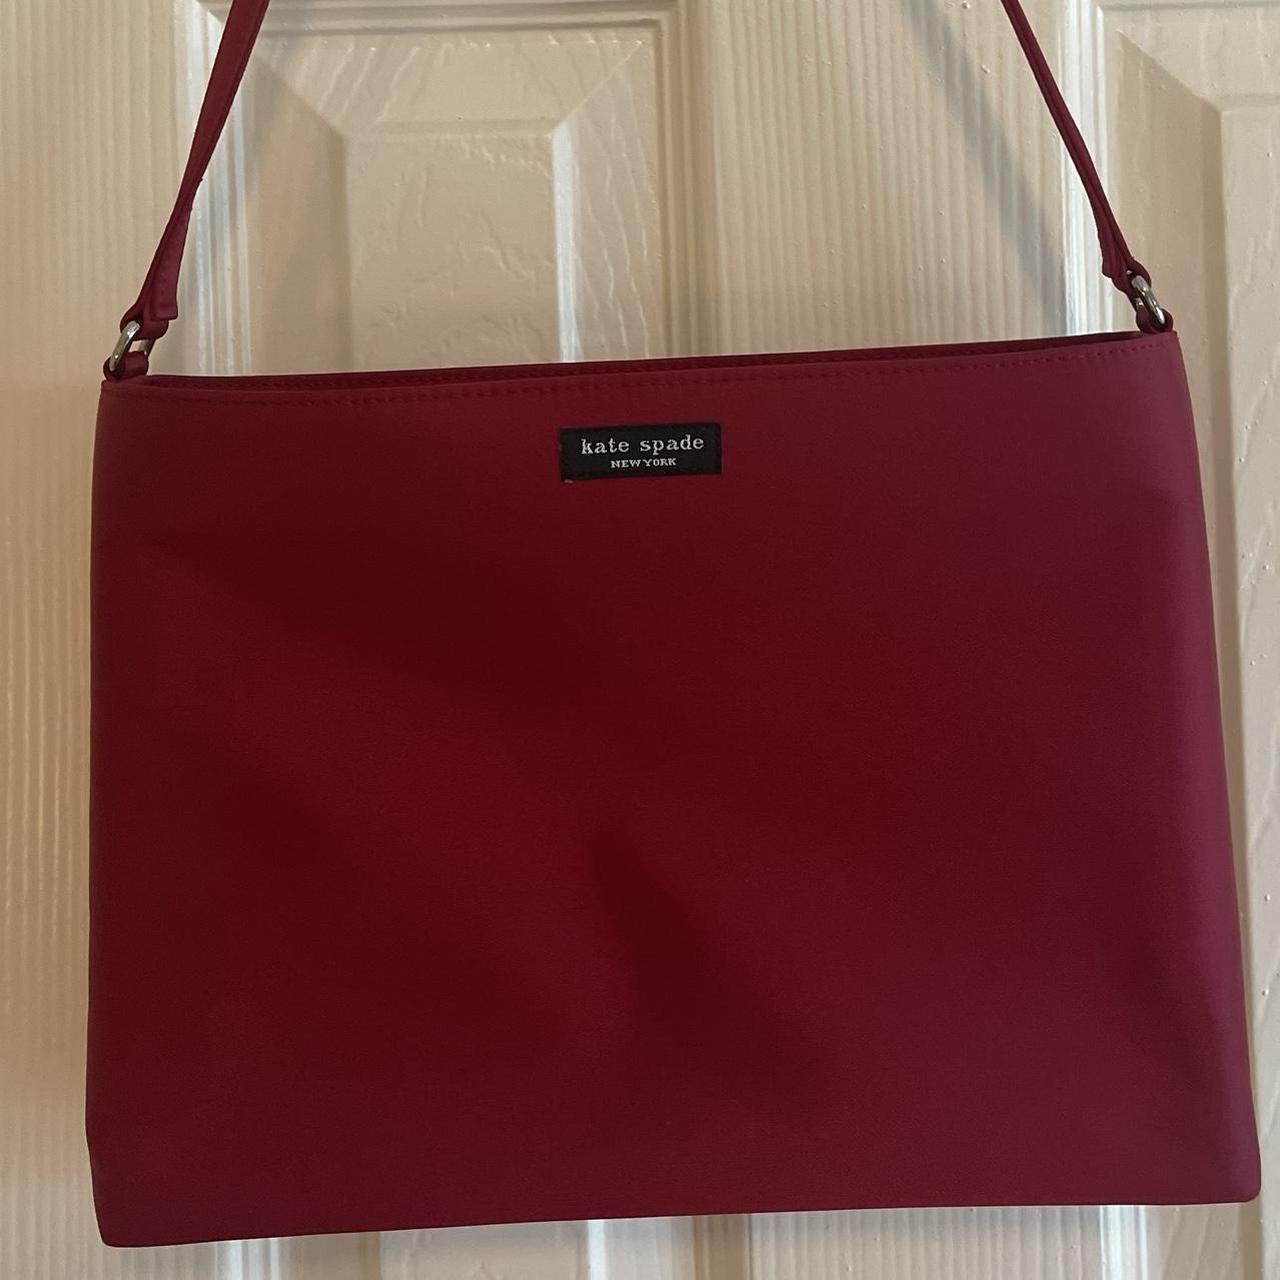 kate spade new york Grove Court Small Leslie Top Handle Bag,Dynasty Red/Black,One  Size : Amazon.in: Shoes & Handbags